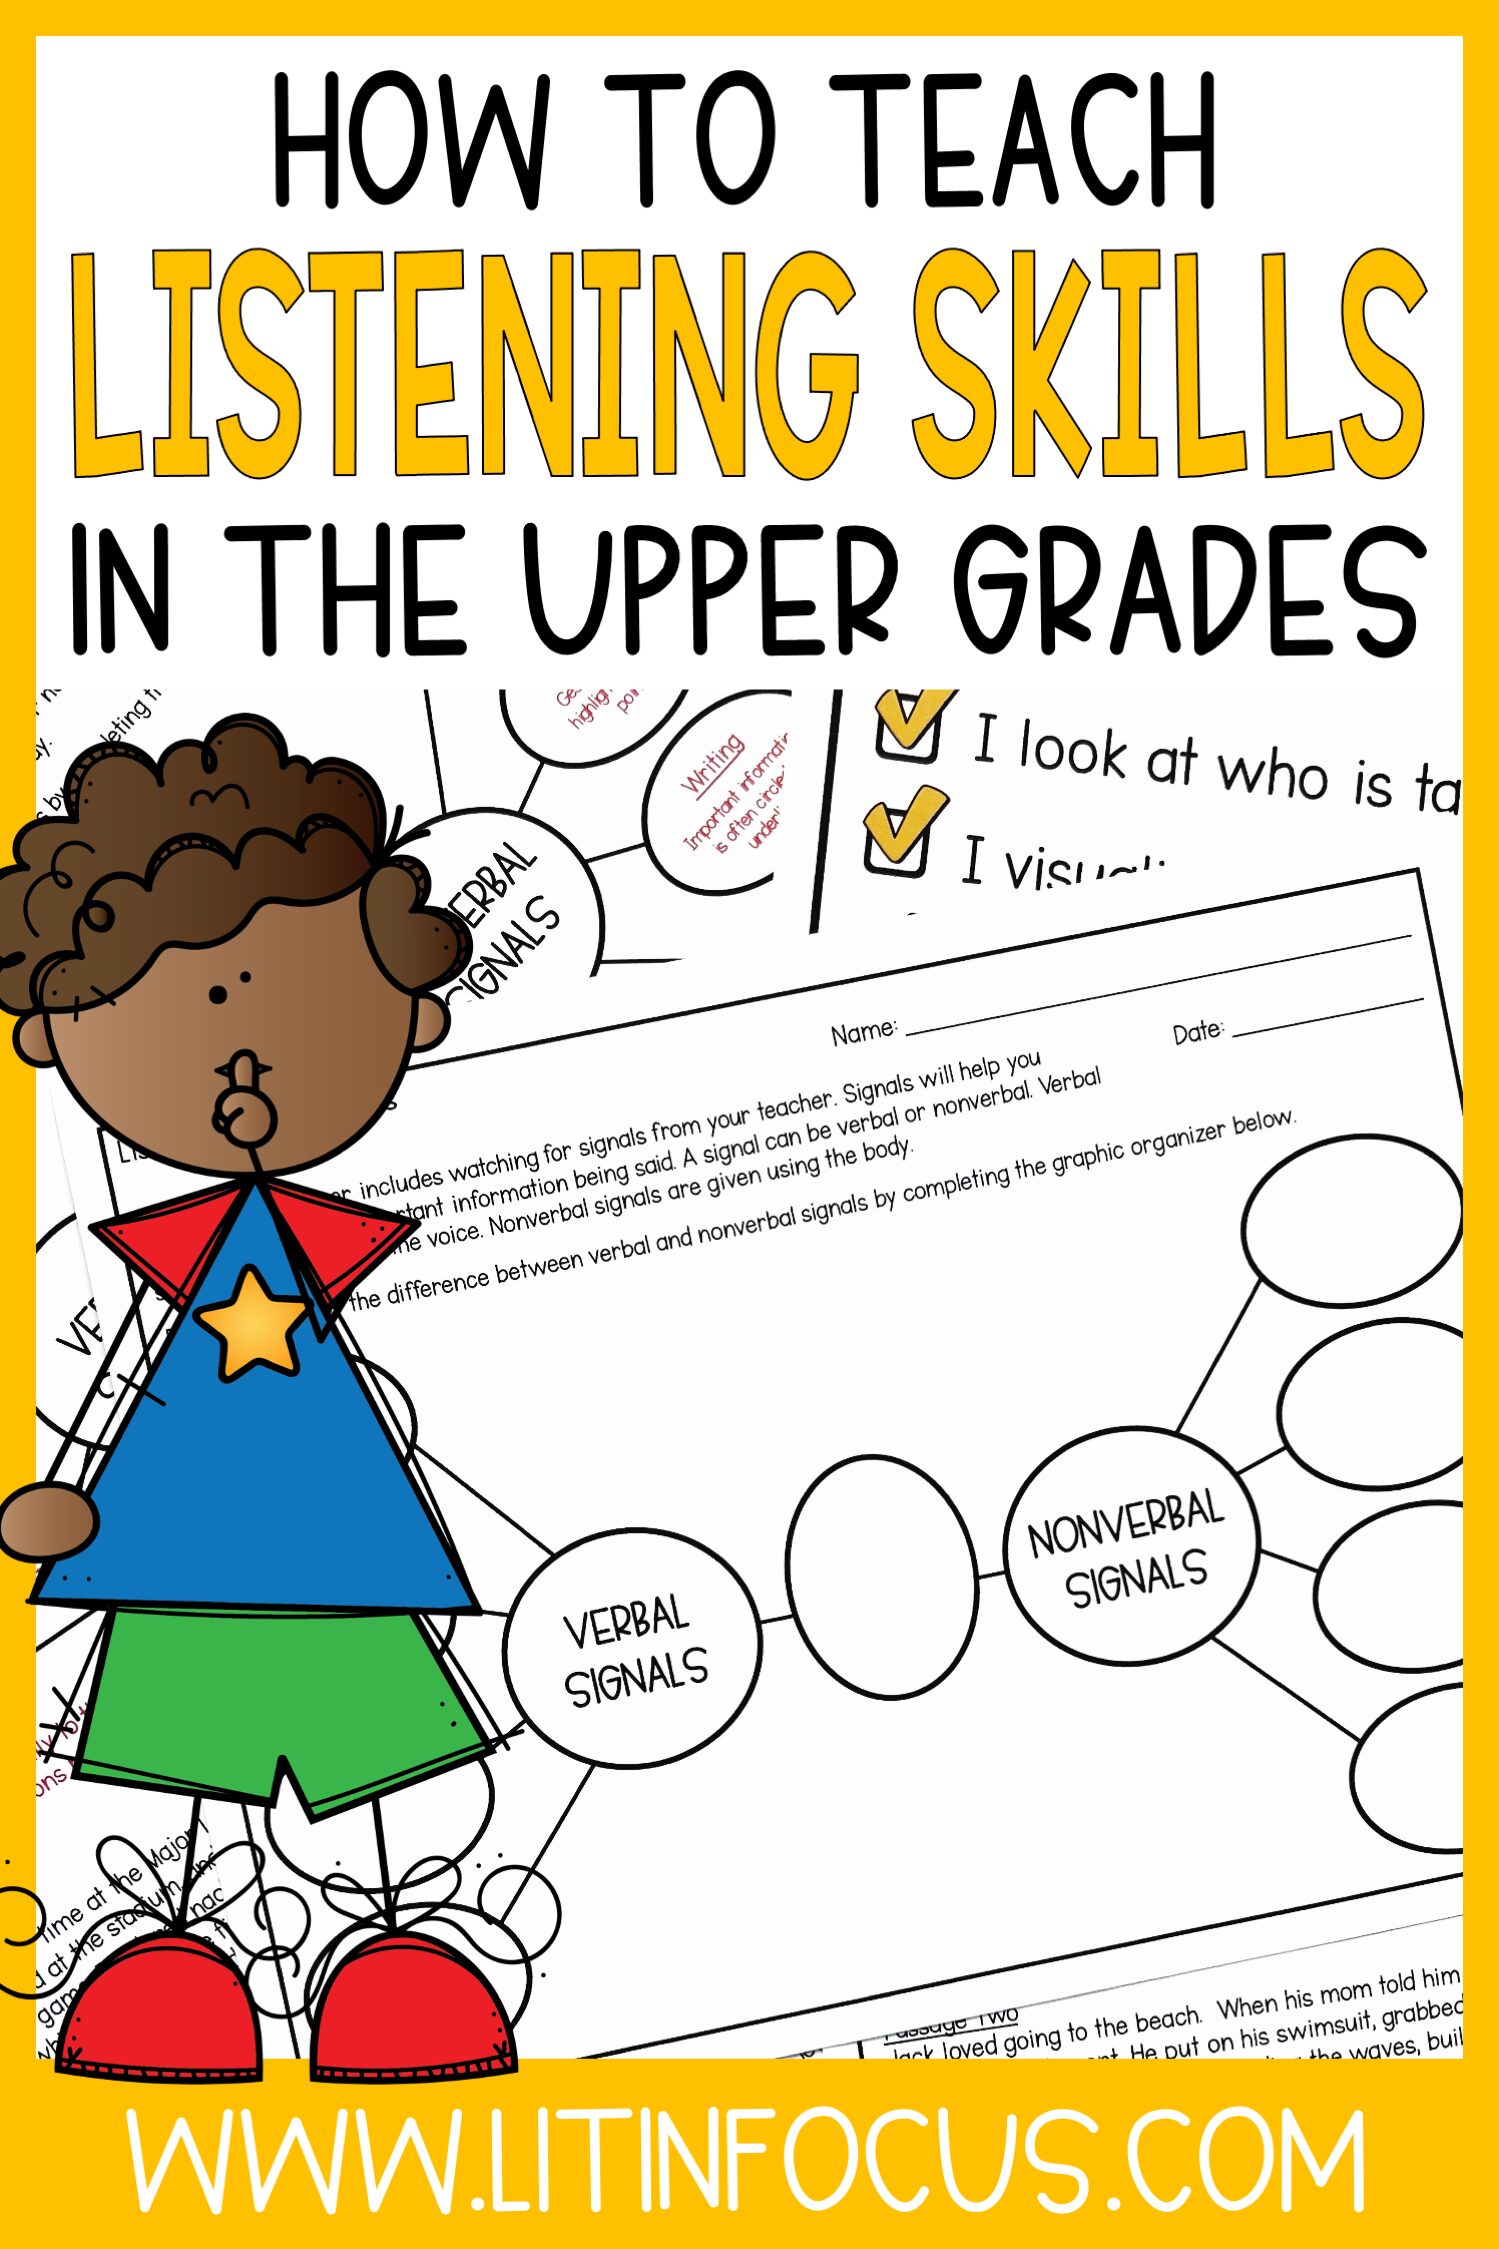 How to teach listening skills in the upper grades